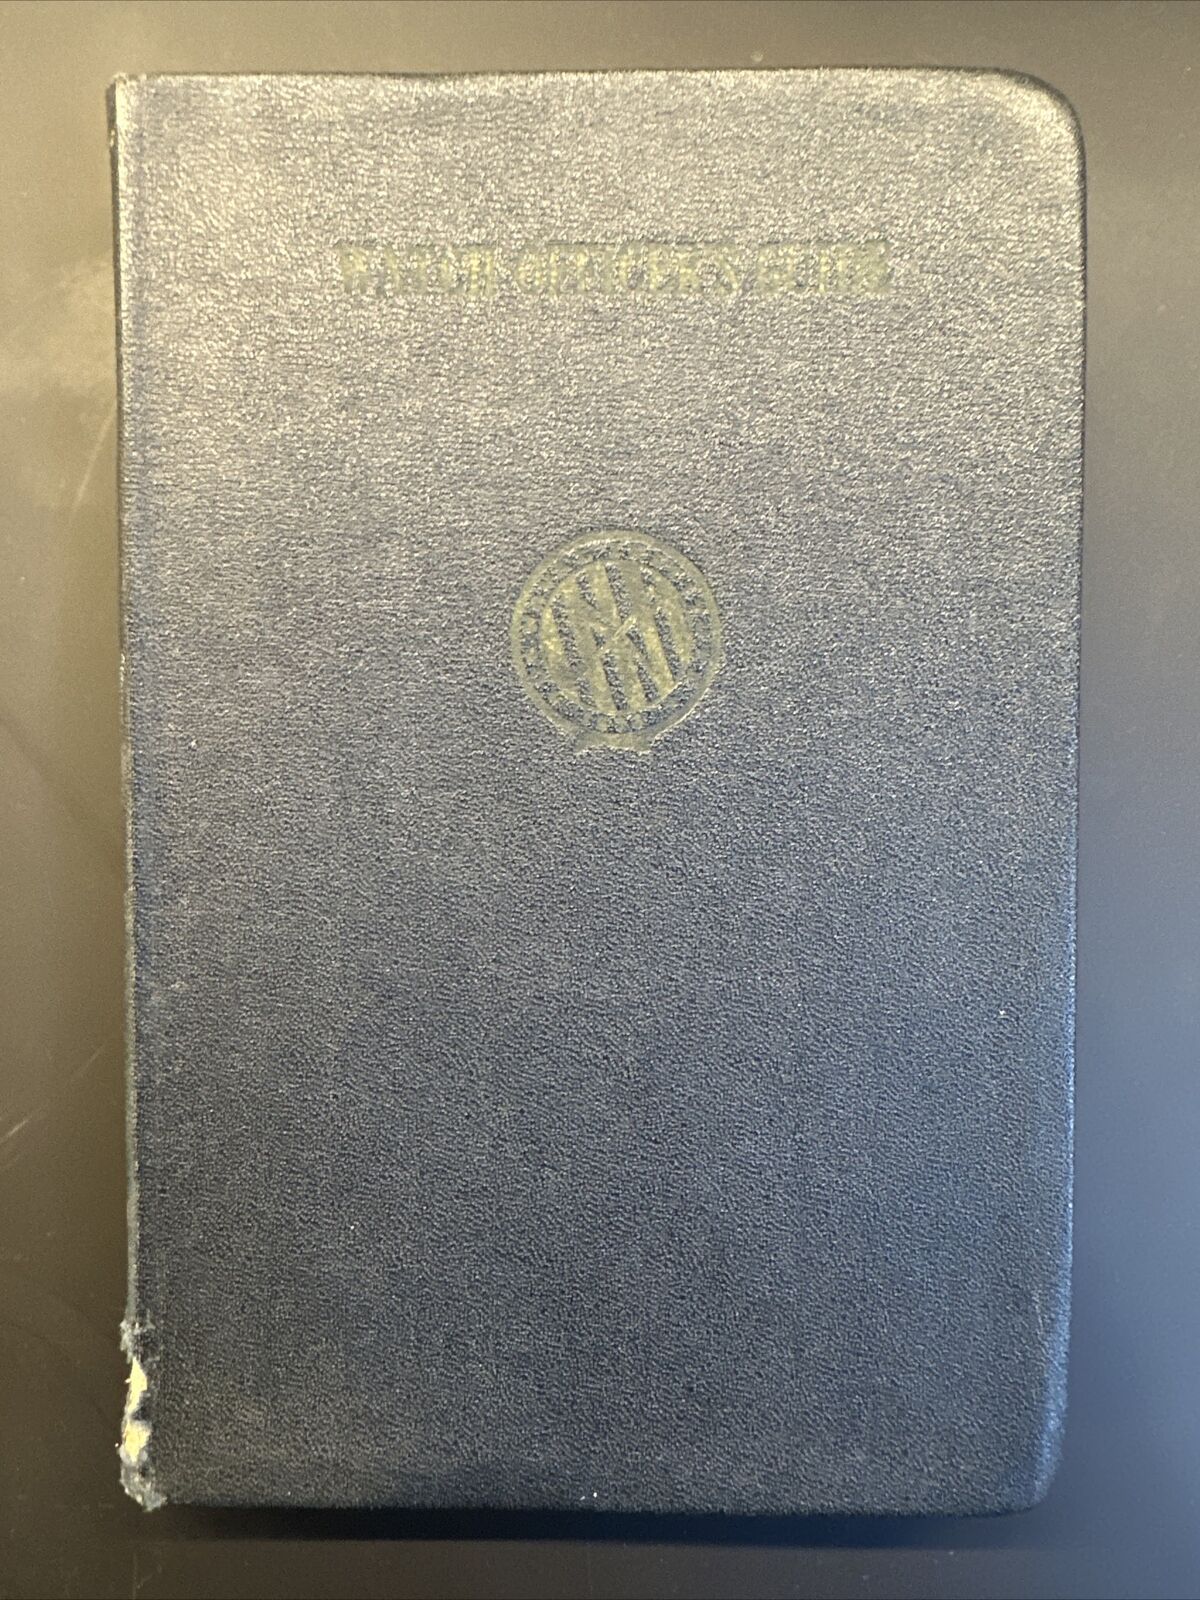 Watch Officers Guide 1941 U.S. Navy Vintage Copy RARE Perfect